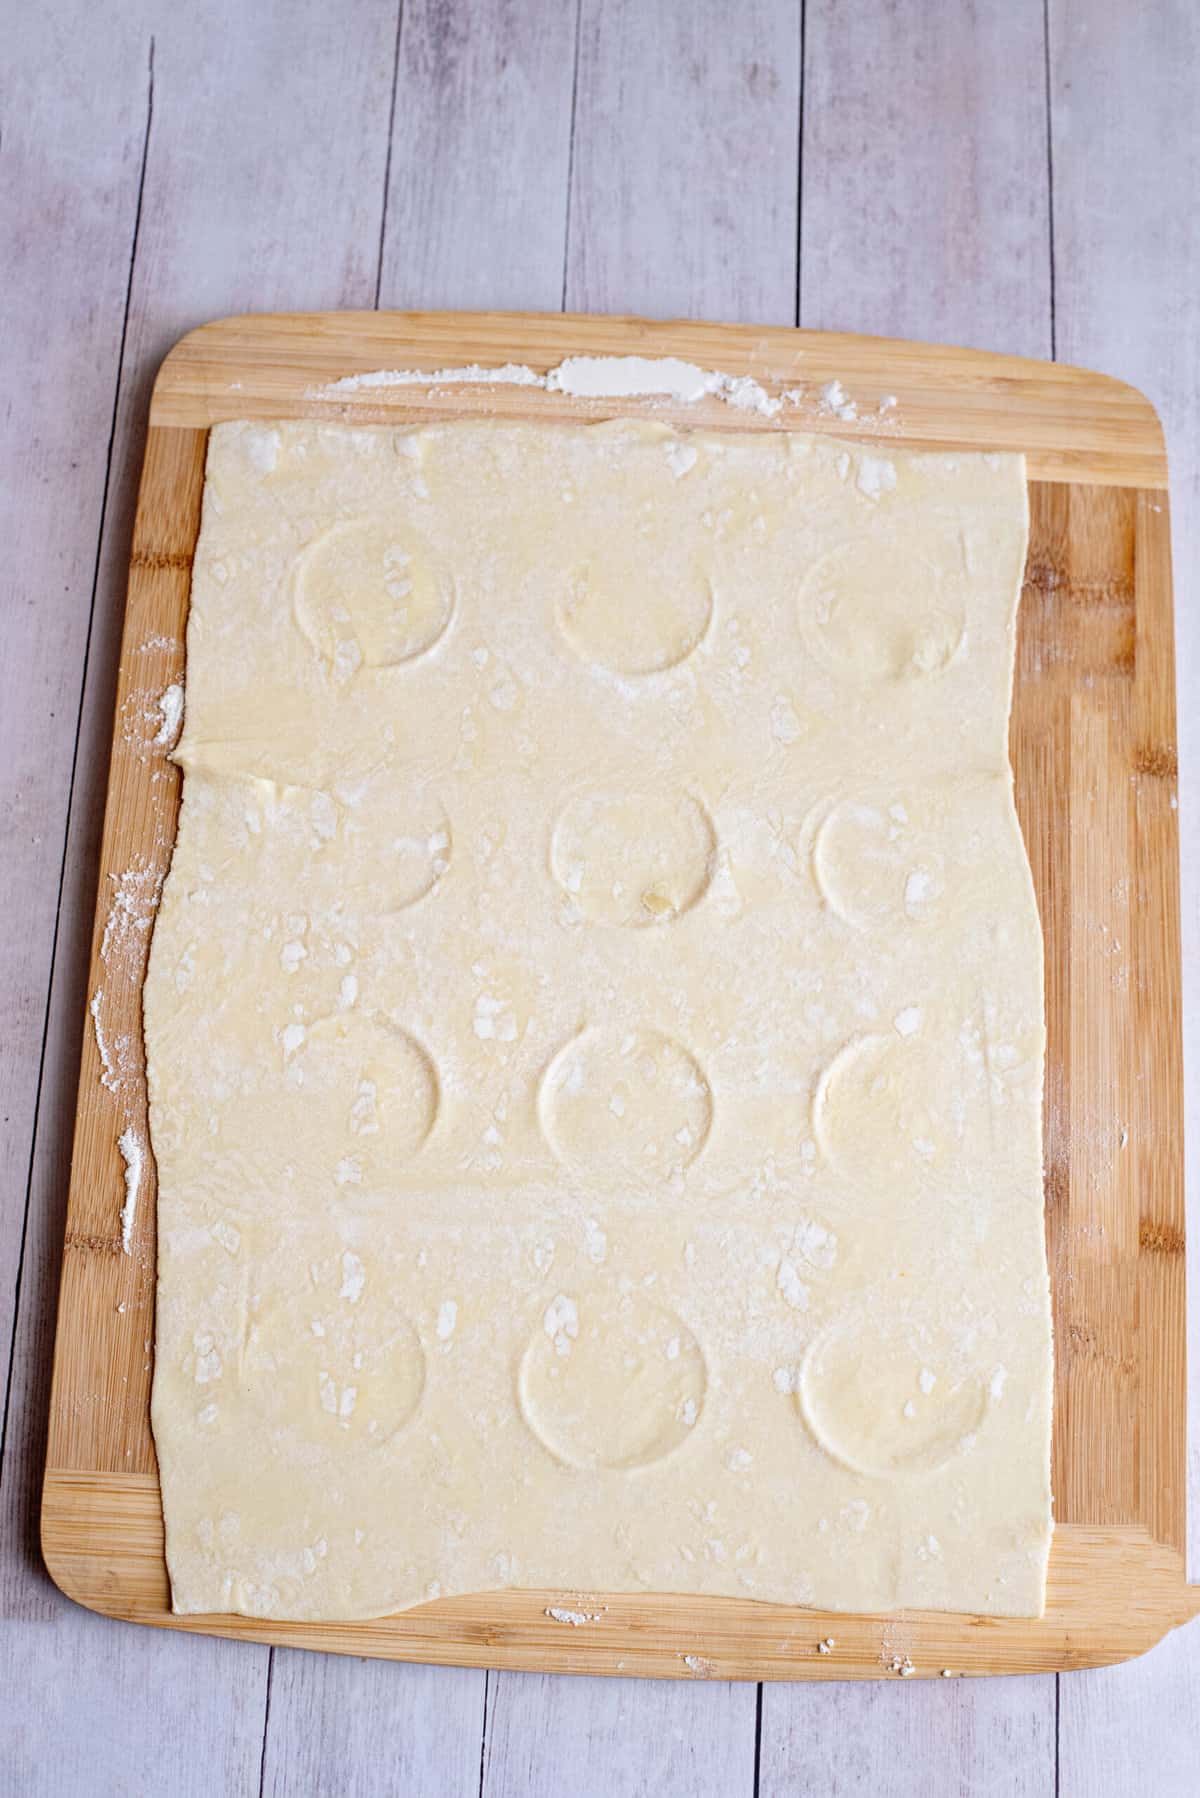 indentations on the puff pastry